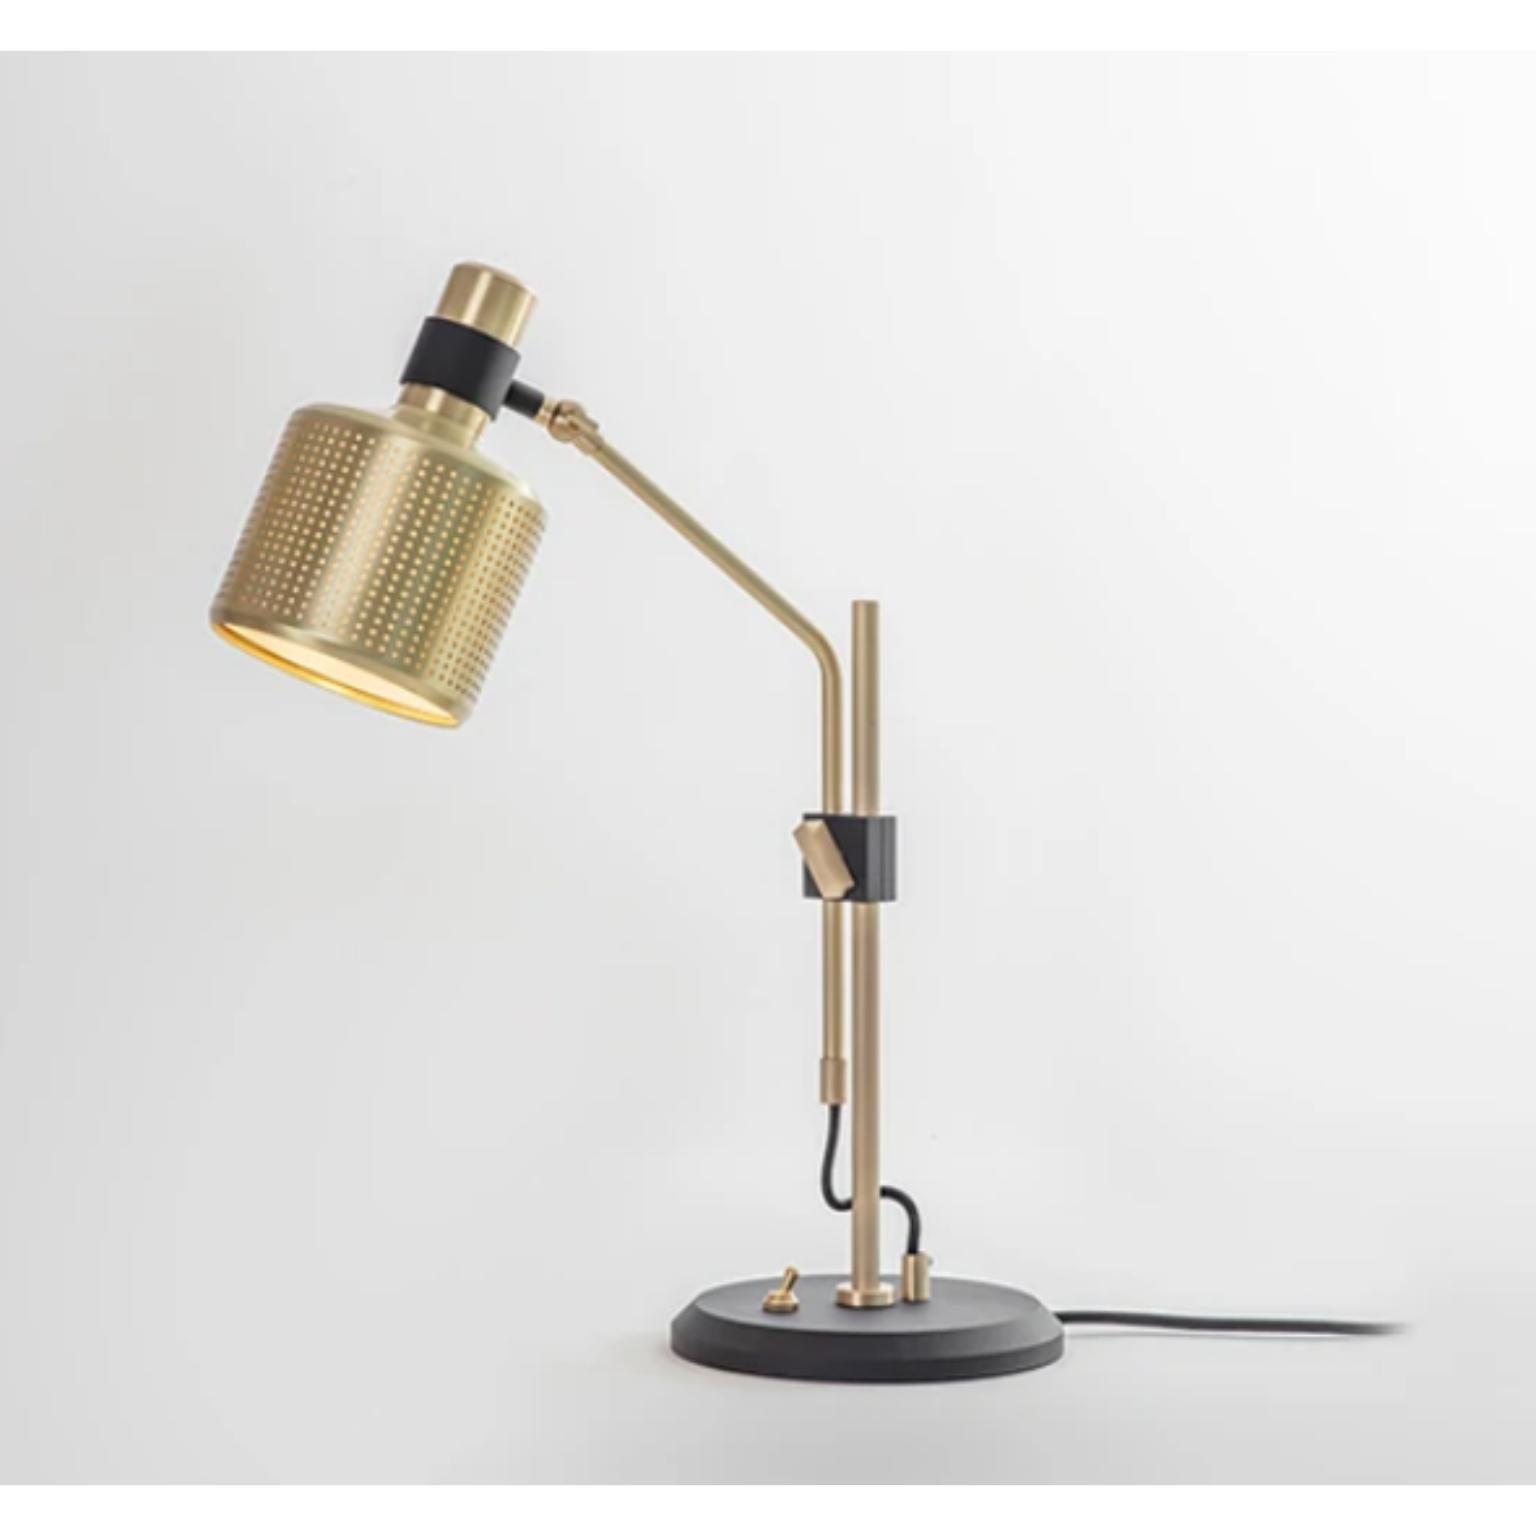 Riddle table lamp by Bert Frank
Dimensions: 18 x 35 x H 47 cm
Materials: Brass 

Available finishes: Brass and black
All our lamps can be wired according to each country. If sold to the USA it will be wired for the USA for instance.

When